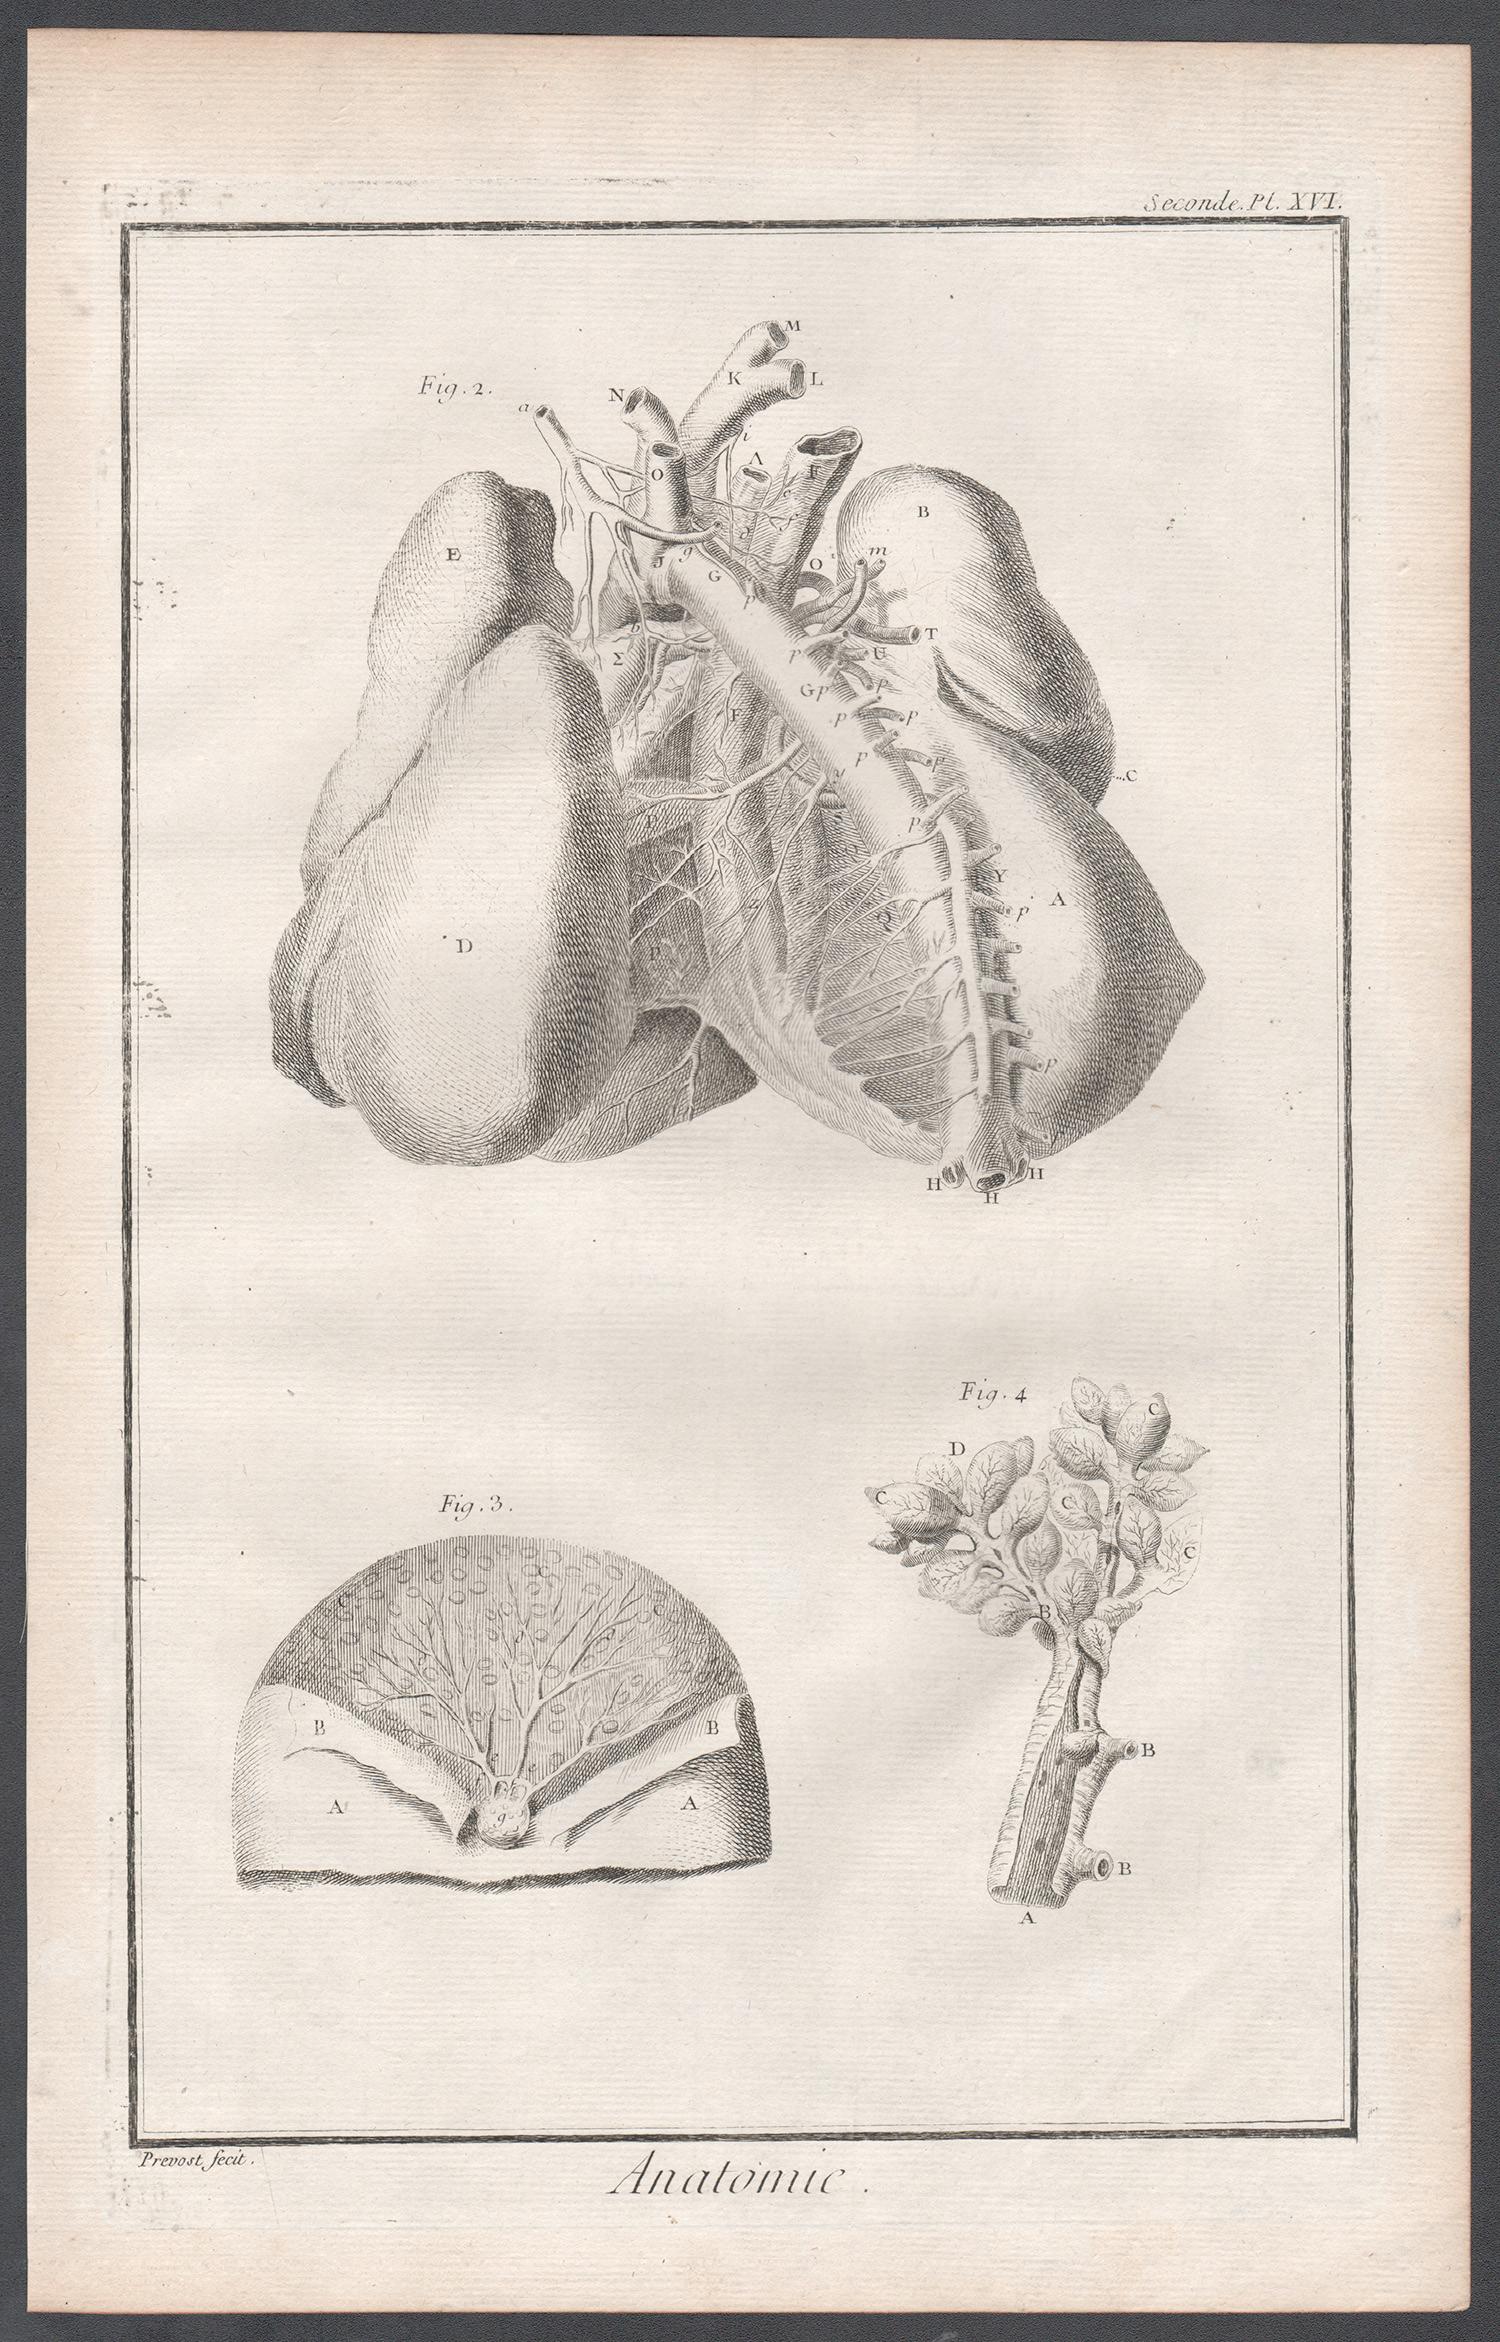 'Anatomie' - Arteries of the chest, French anatomy medical engraving, c1770 - Print by Unknown